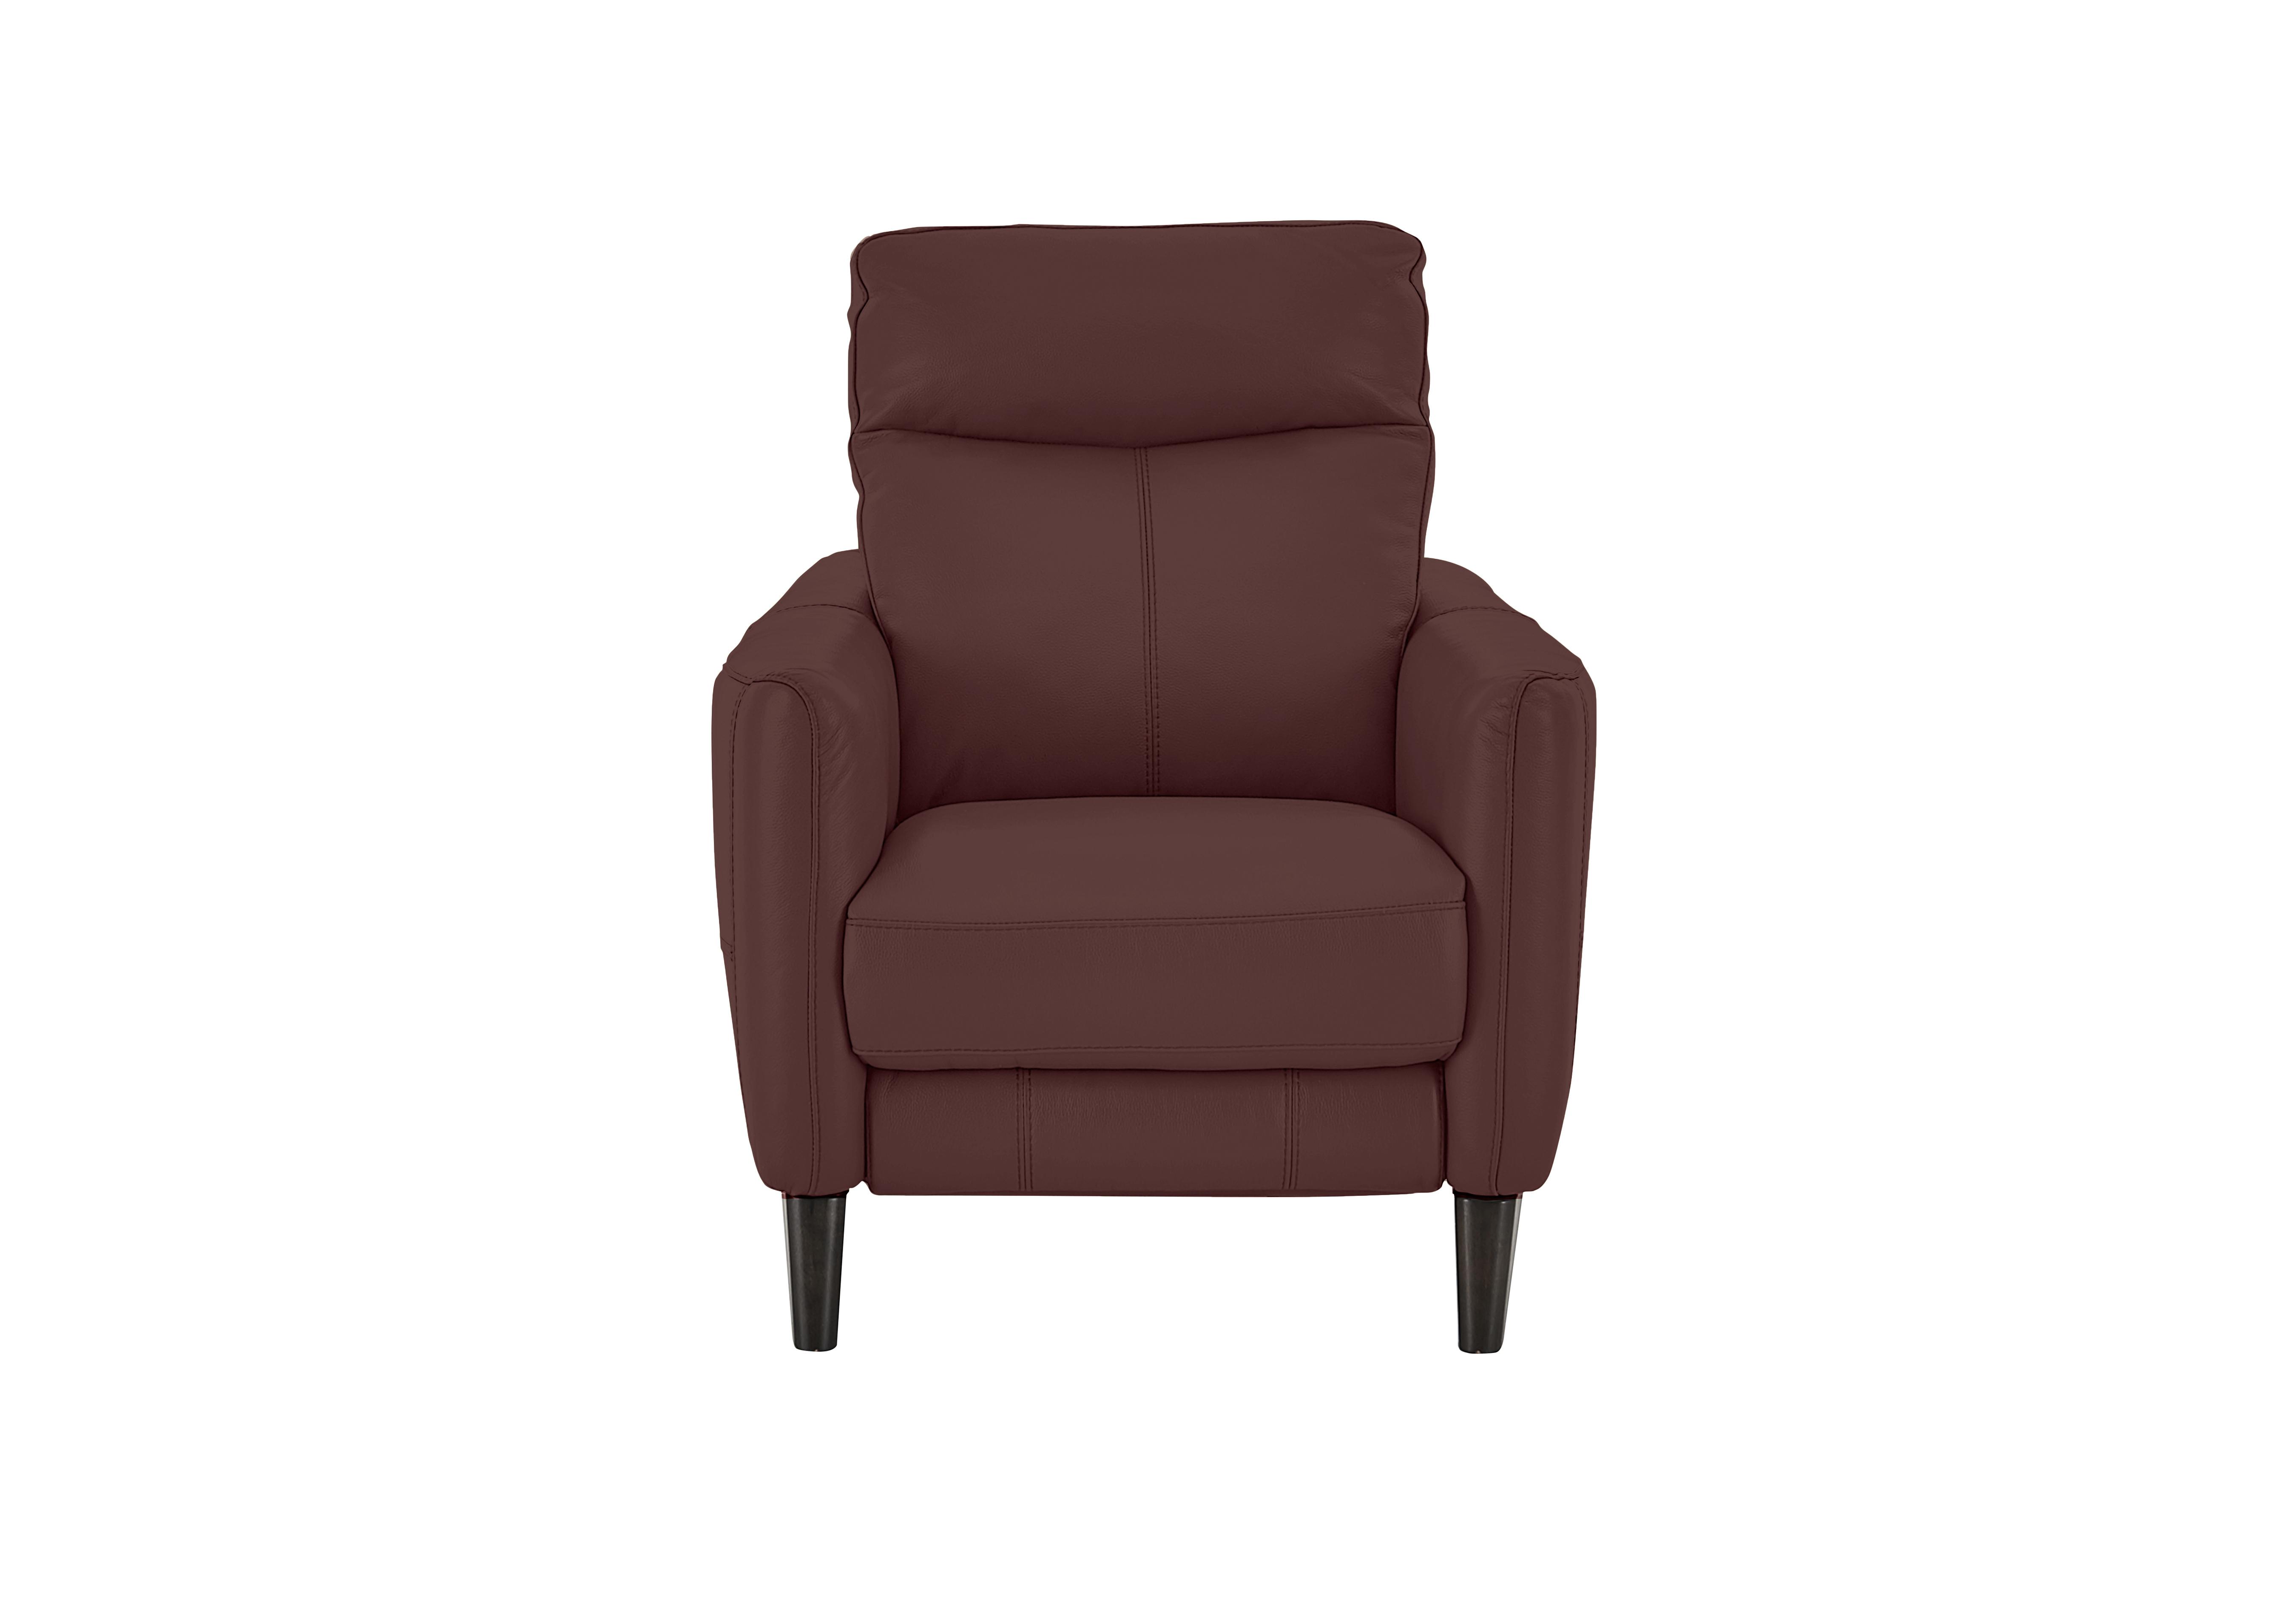 Compact Collection Petit Leather Recliner Armchair in Bv-035c Deep Red on Furniture Village